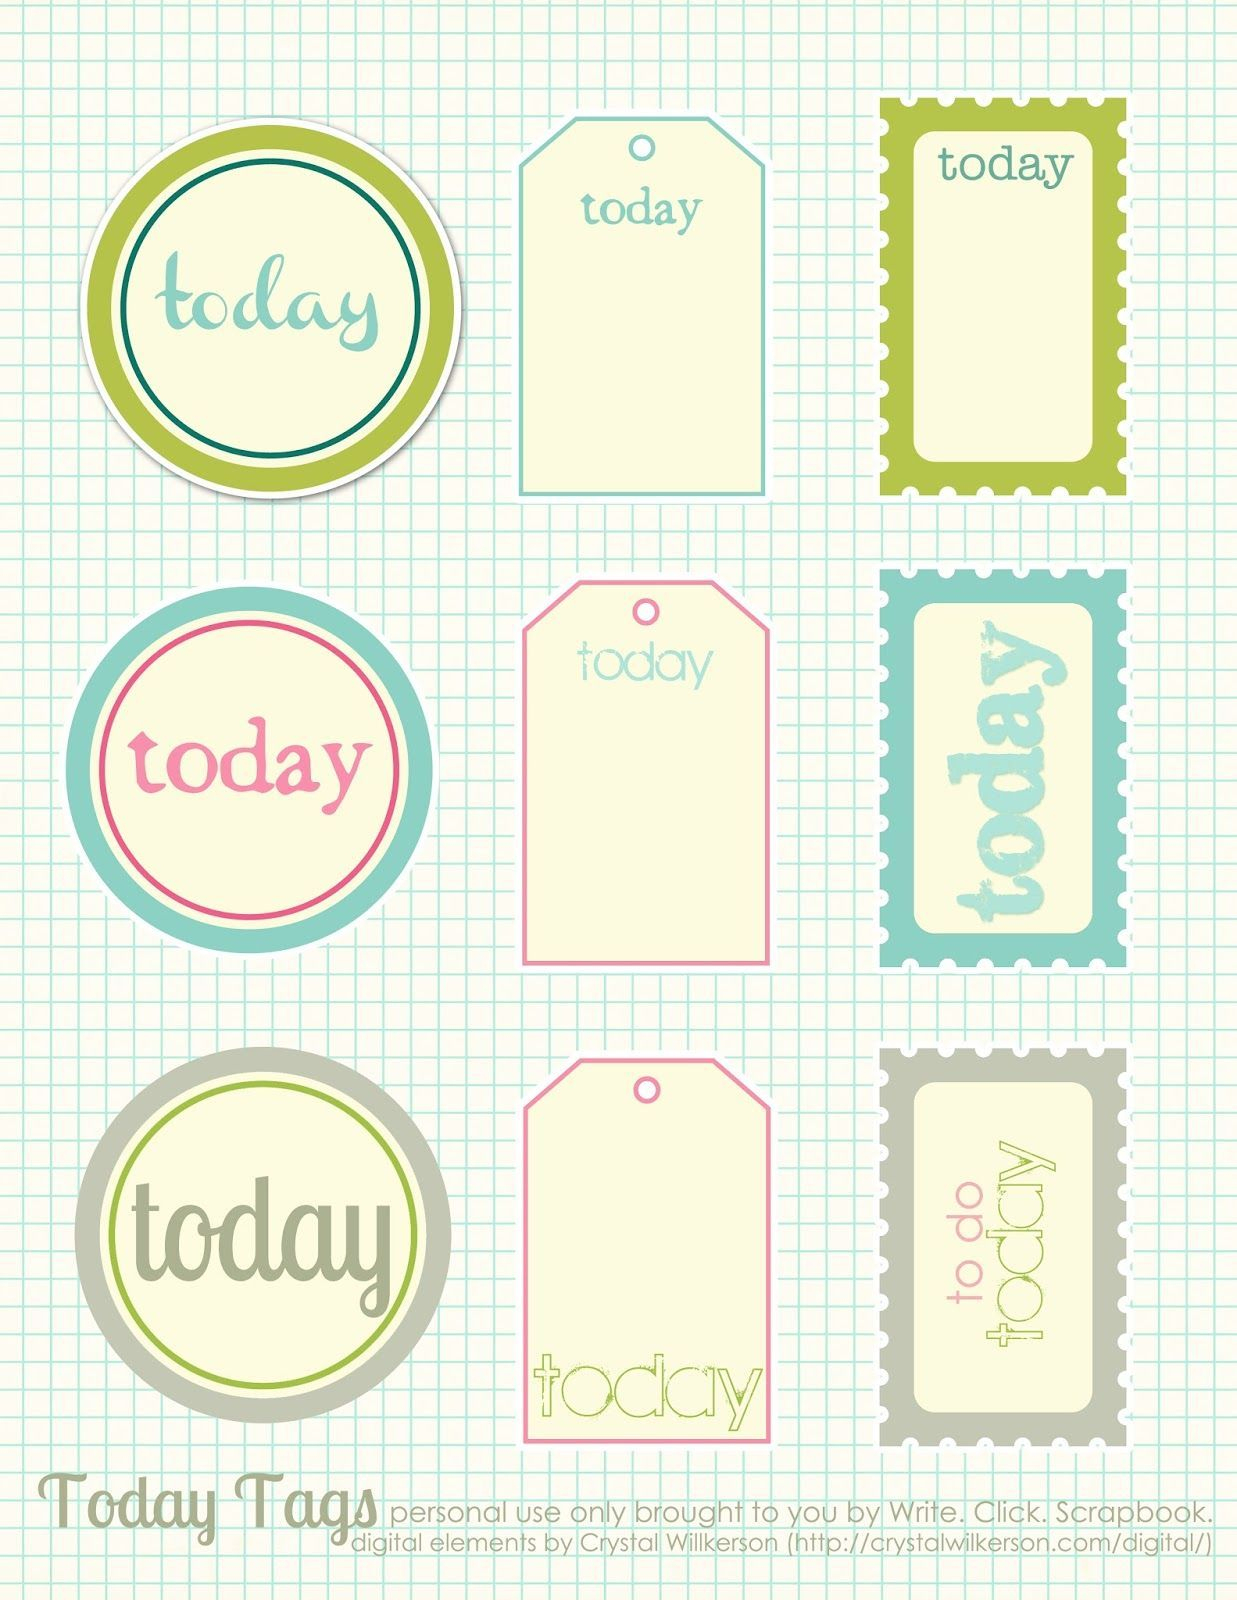 25 Awesome Photo Of Scrapbook Printables Free | Scrapbook Diy Ideas - Free Printable Scrapbook Page Designs